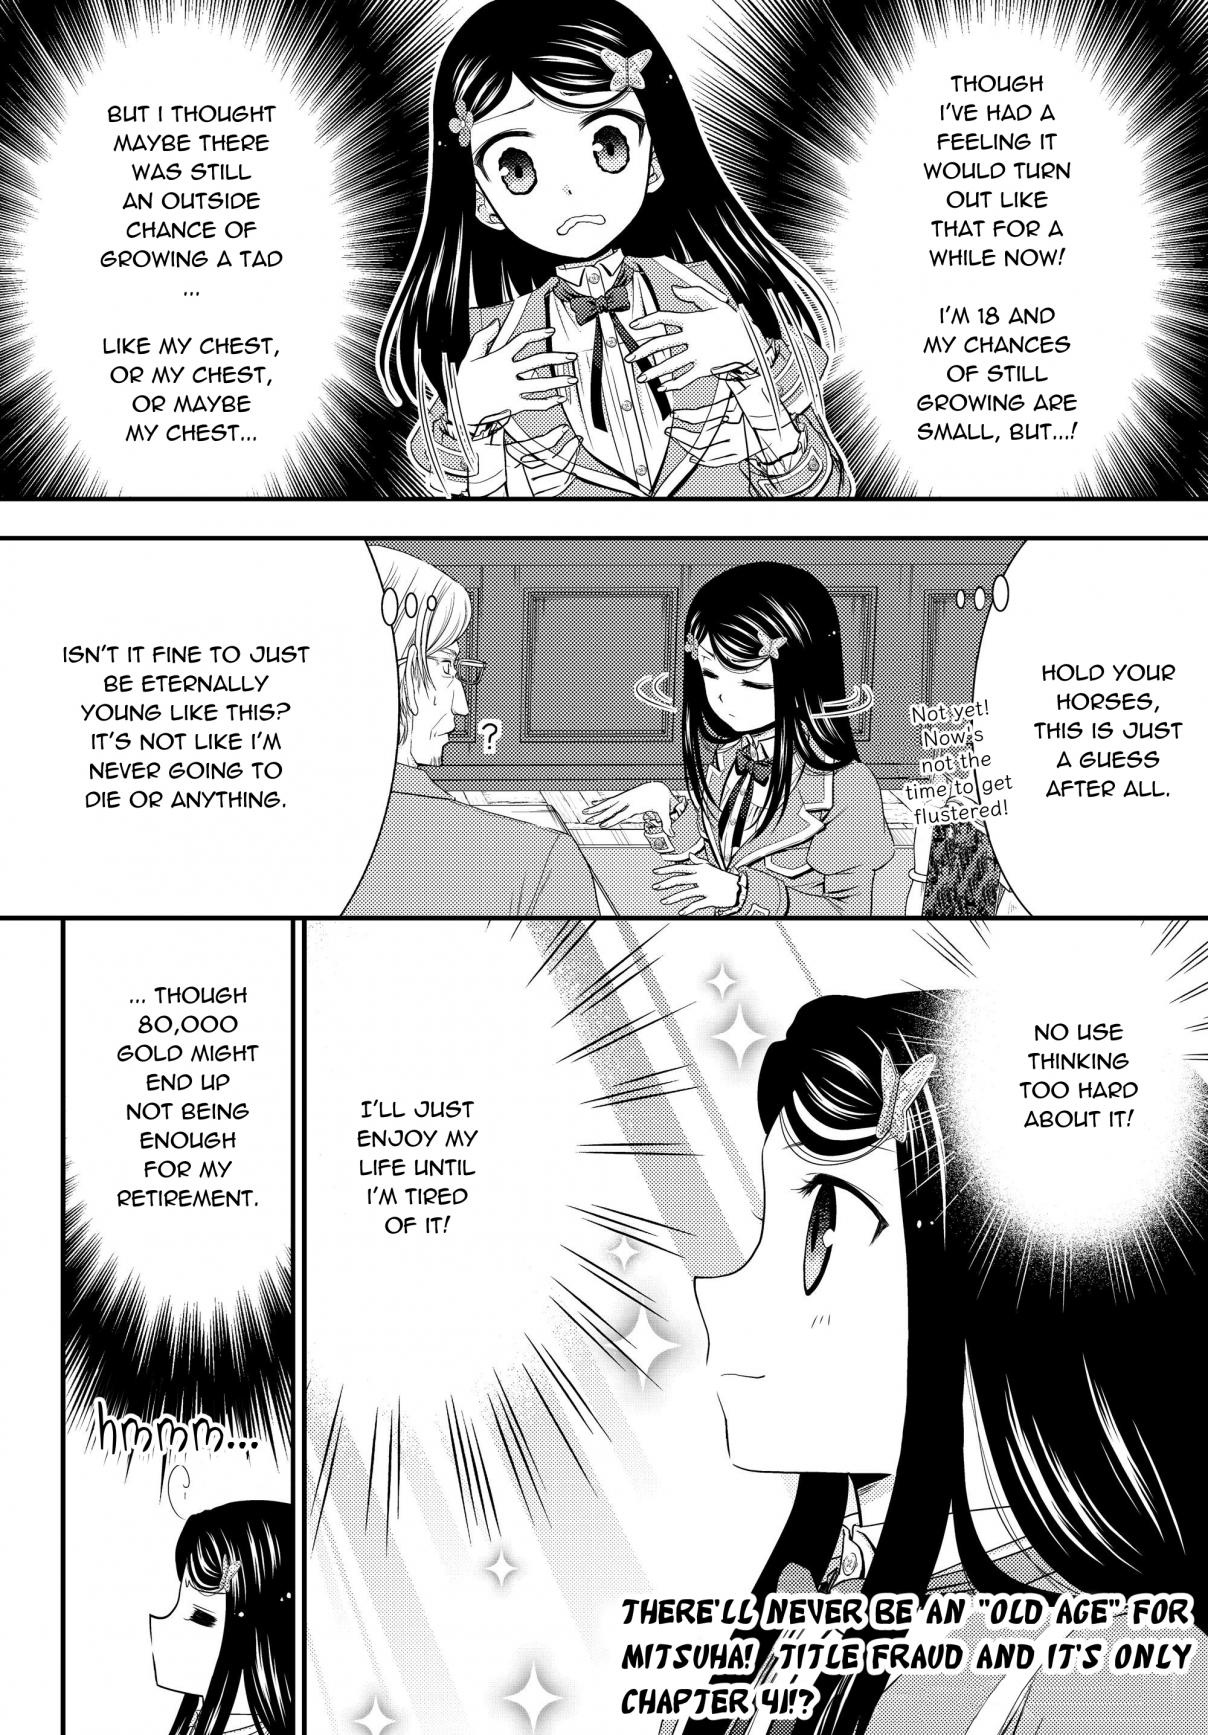 Saving 80,000 Gold Coins in the Different World for My Old Age Vol. 6 Ch. 41 Other World Offline Meeting, Part 1